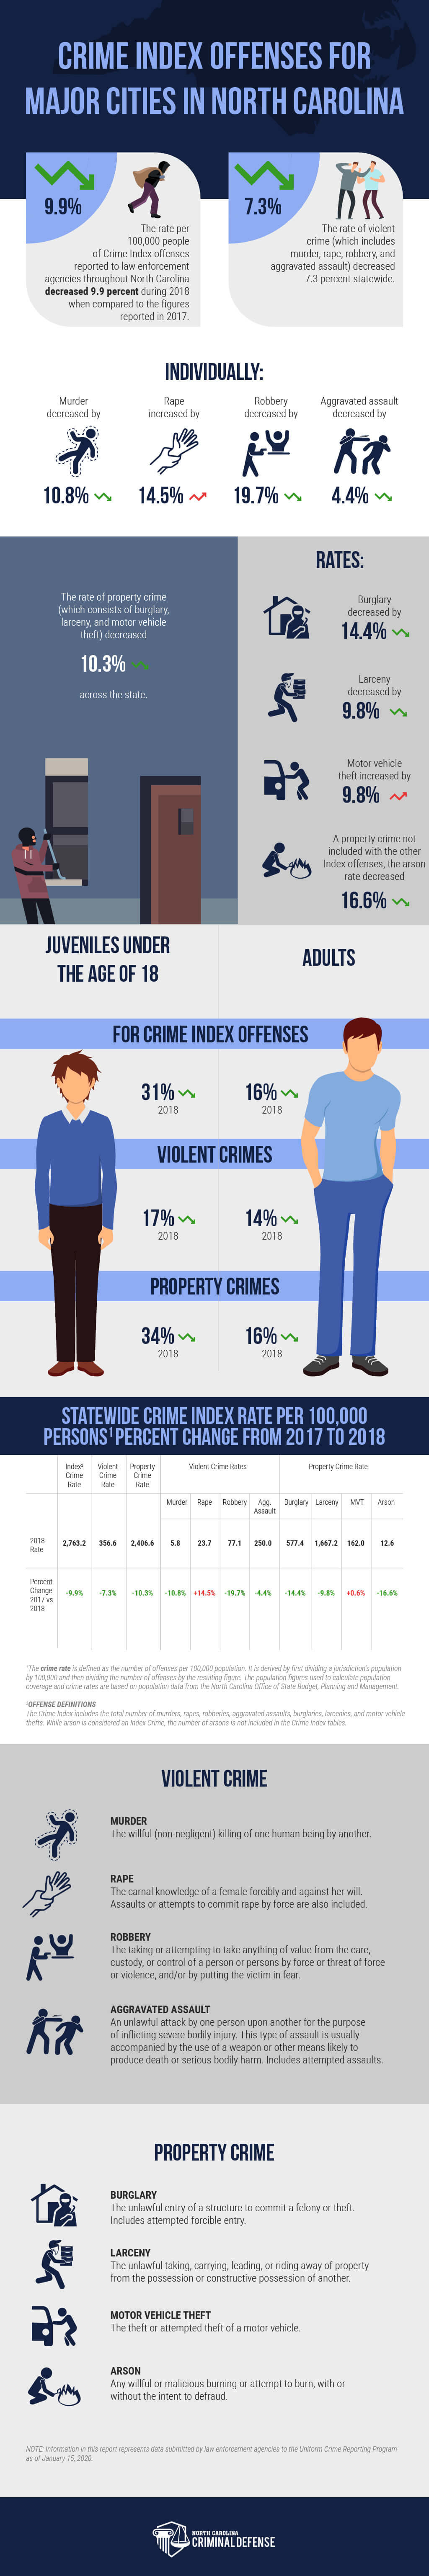 Crime Index Offenses for Major North Carolina Cities